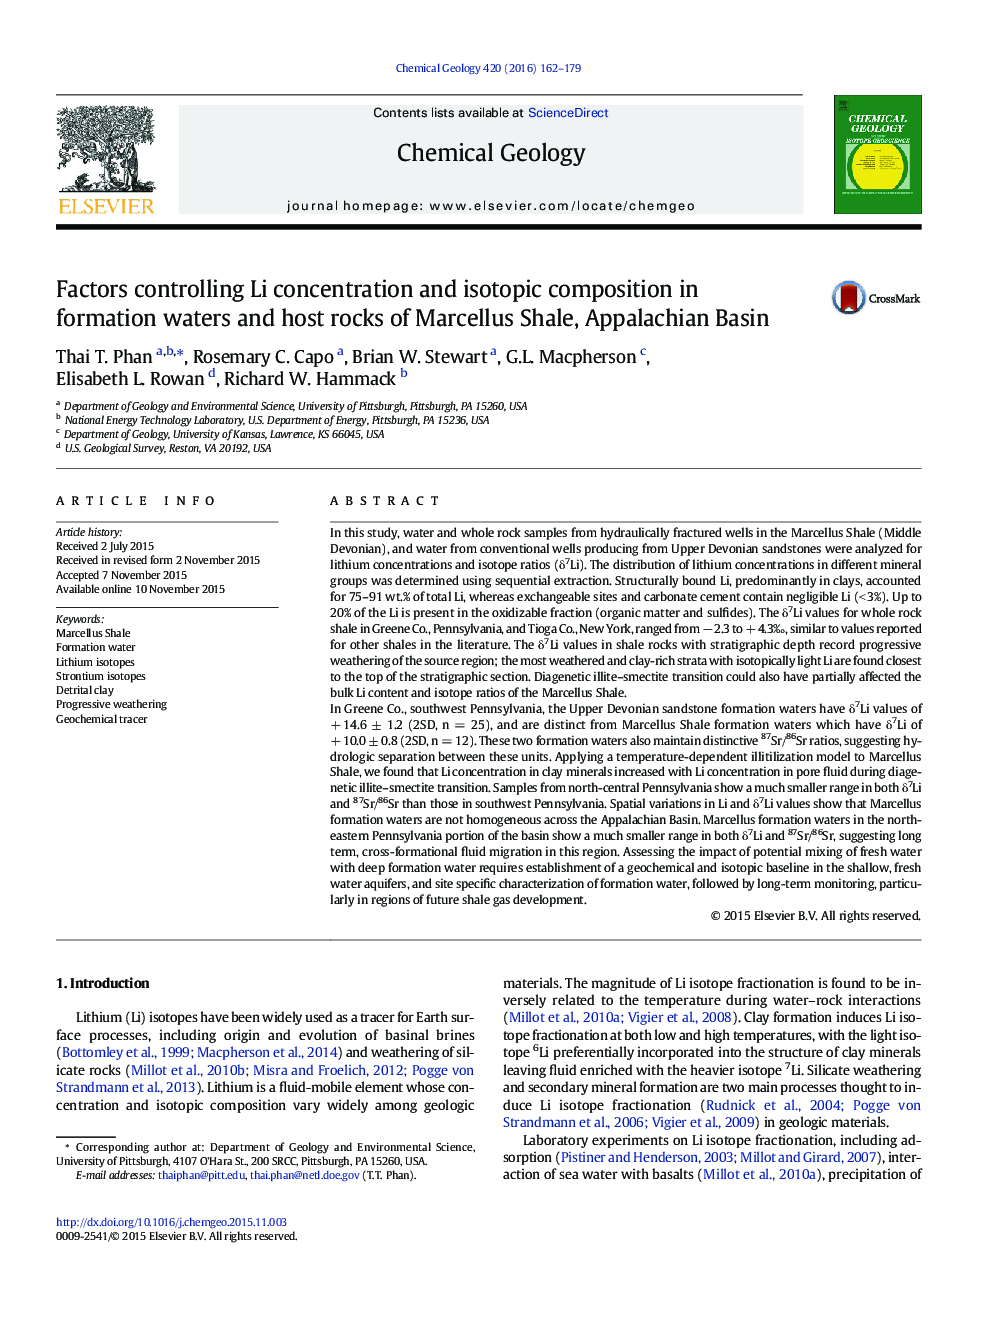 Factors controlling Li concentration and isotopic composition in formation waters and host rocks of Marcellus Shale, Appalachian Basin